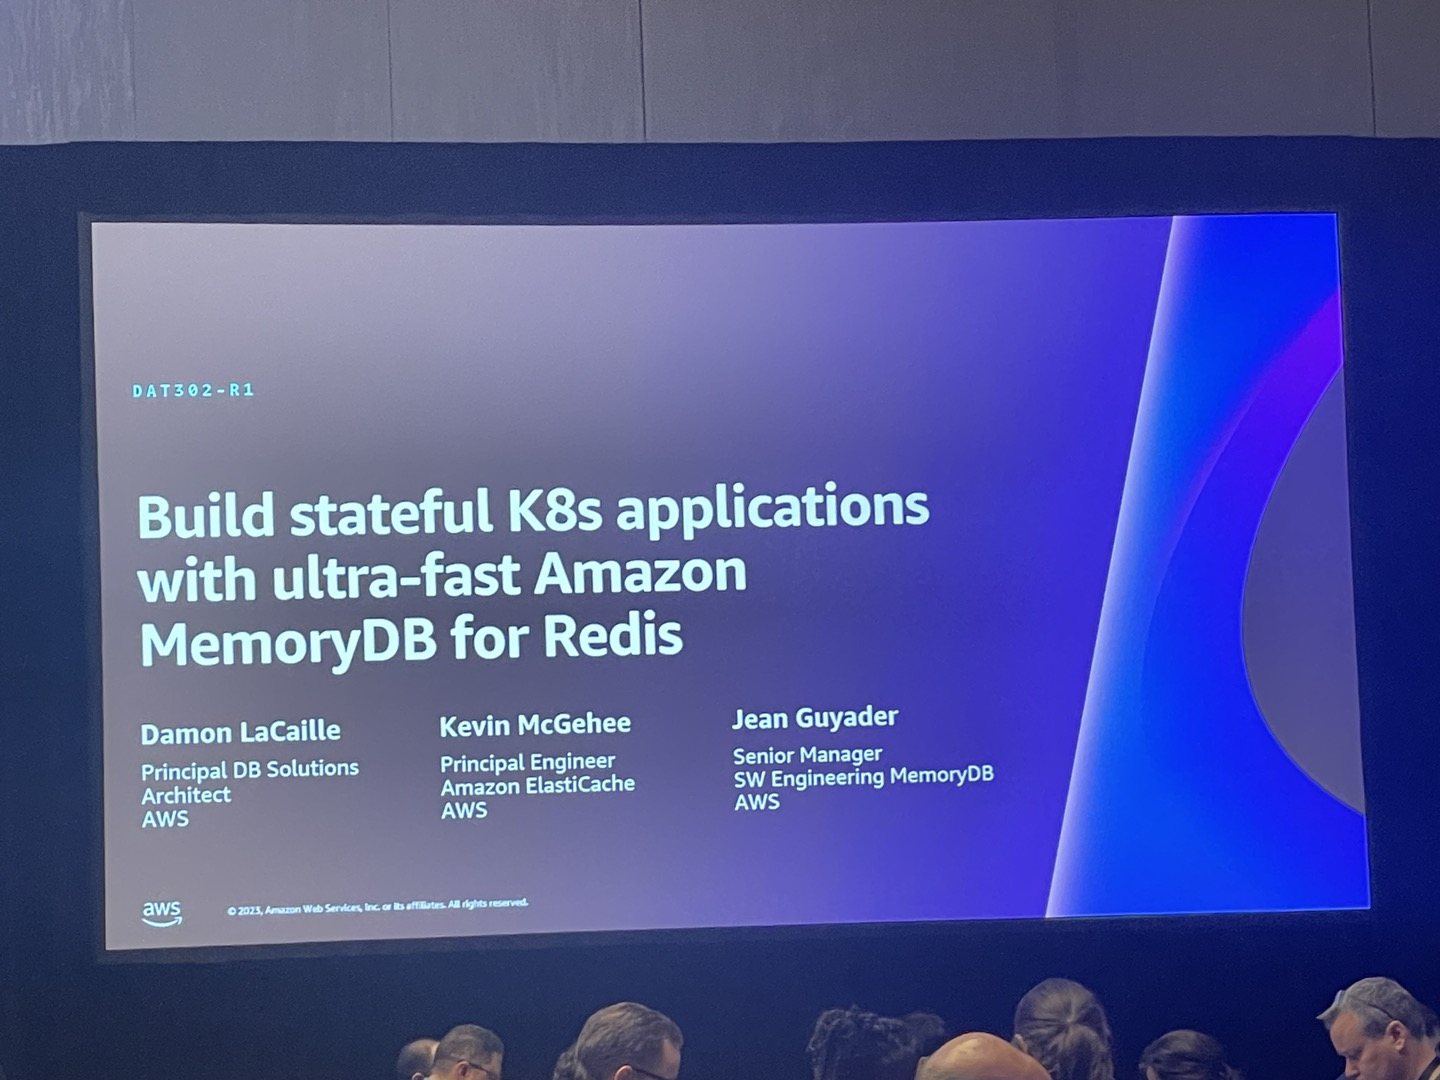 Build stateful K8s applications with ultra-fast Amazon MemoryDB for Redis